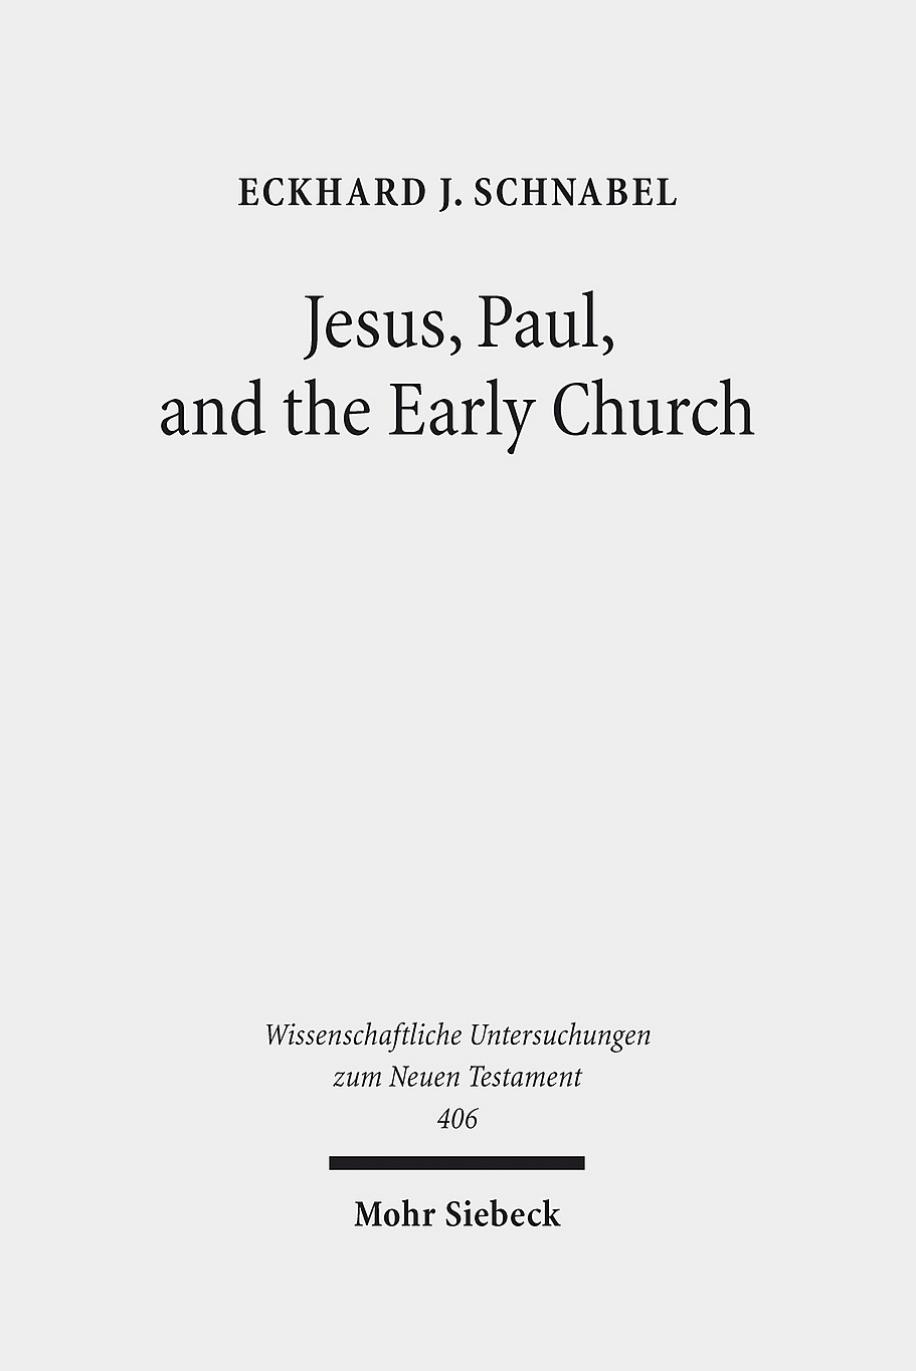 Jesus Paul, and the Early Church by Schnabel